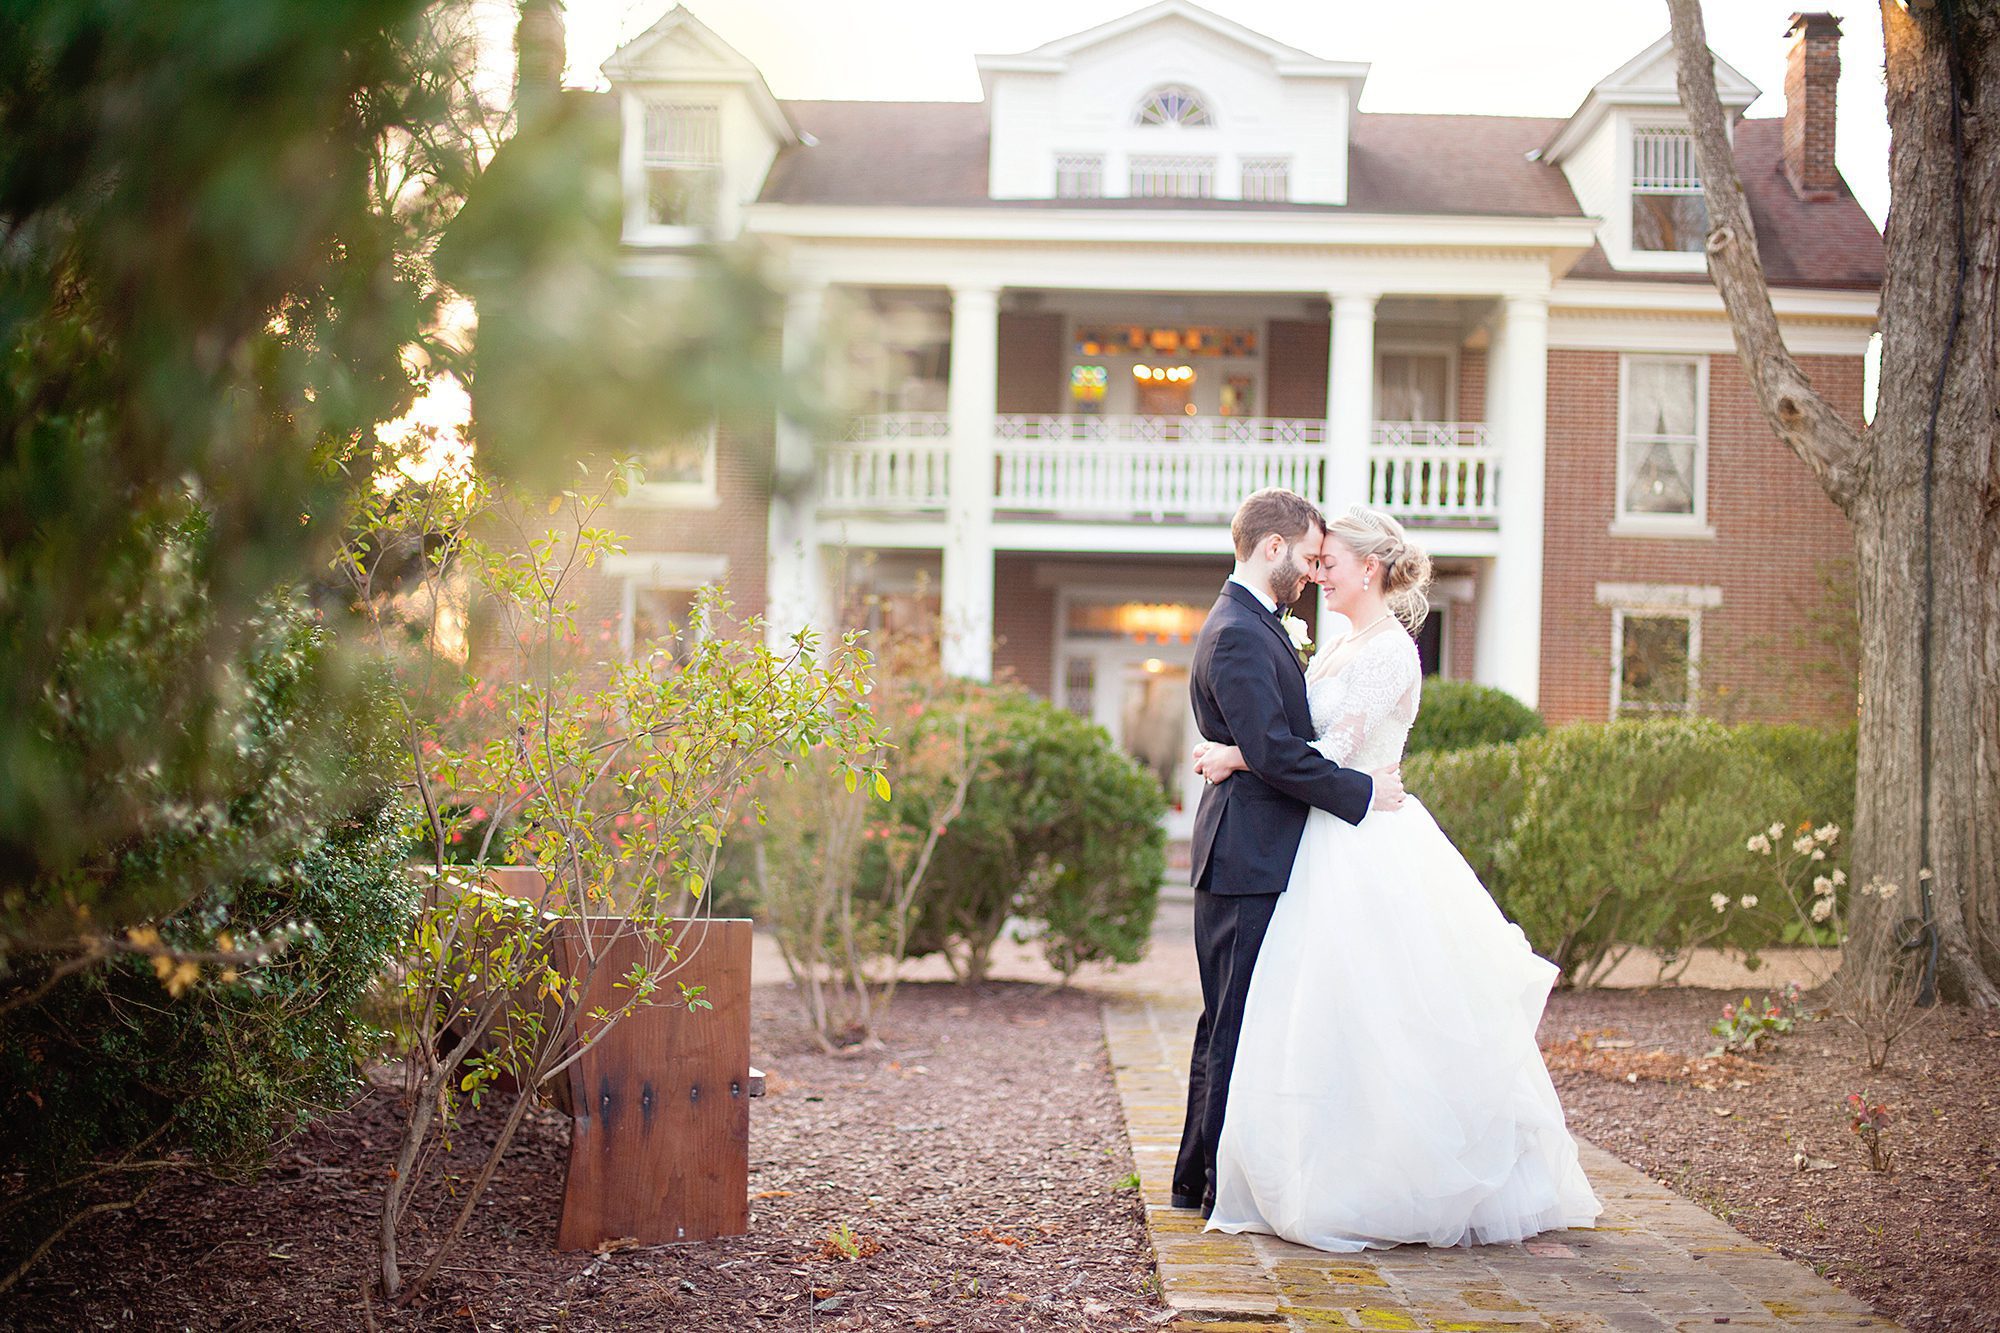 Bride and groom after wedding outside antebellum mansion at Homestead Manor in Thompsons Station, TN / Krista Lee Photography